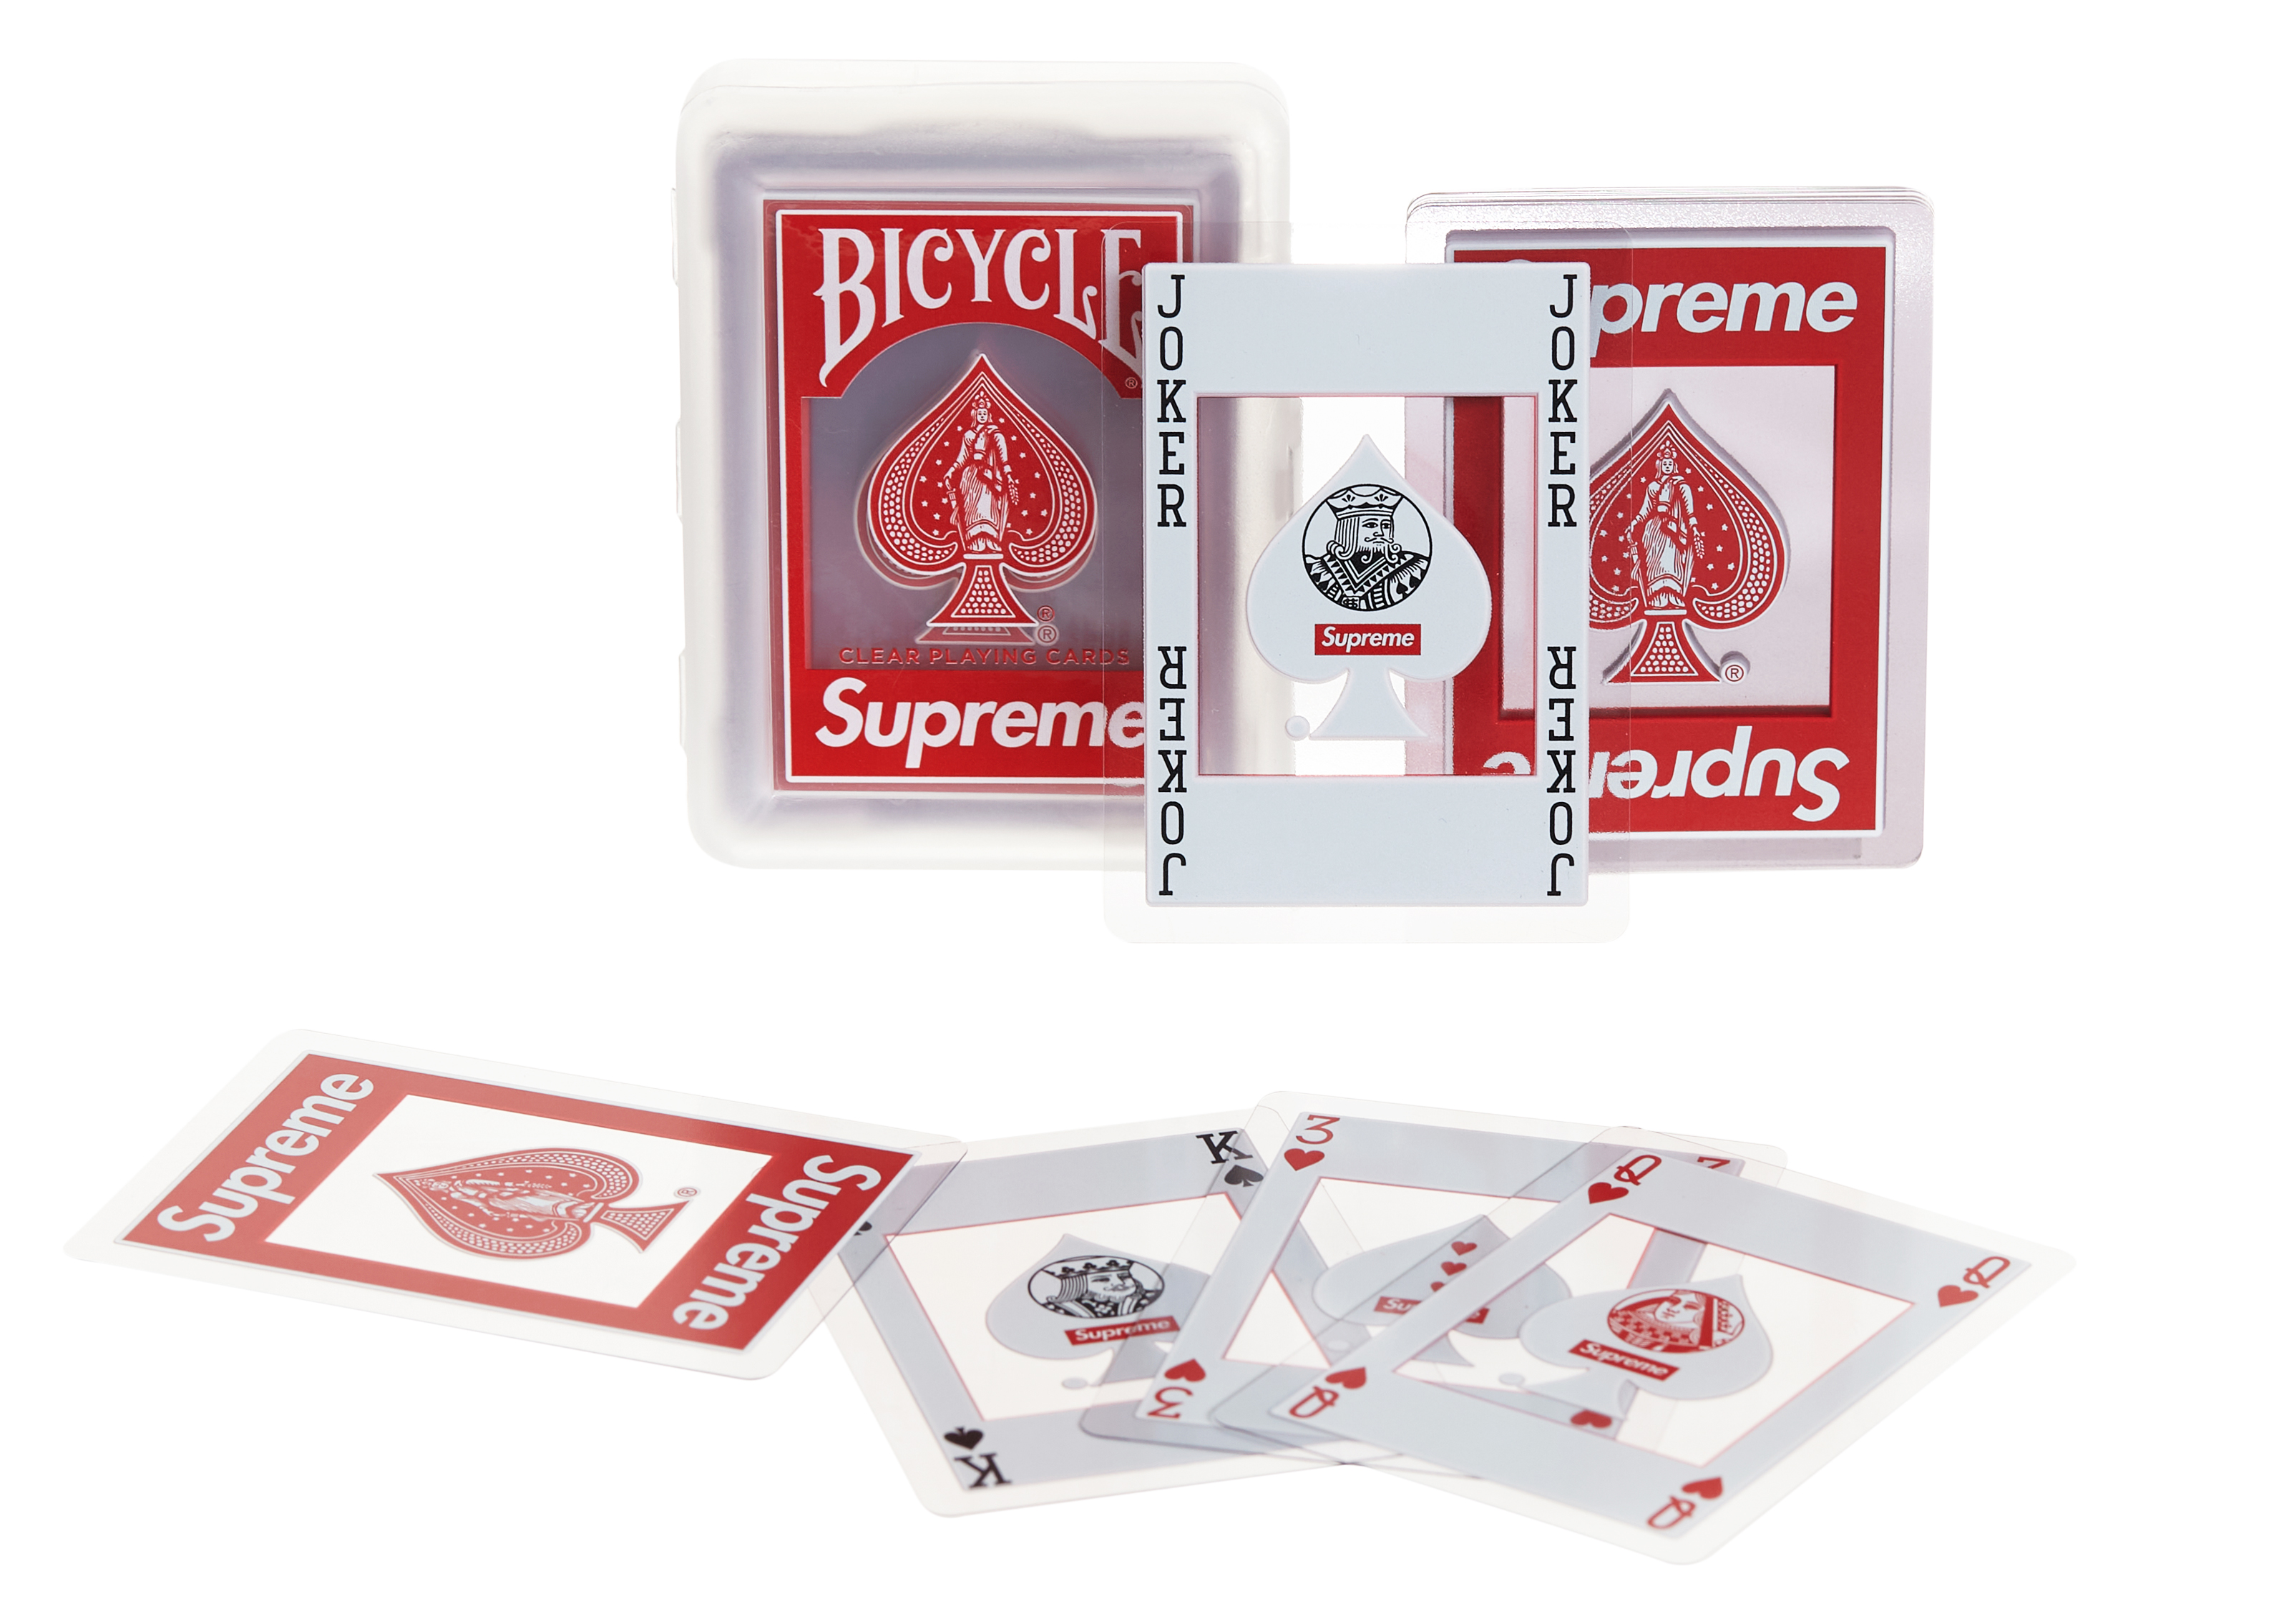 Supreme Bycycle Clear Playing cards トランプ